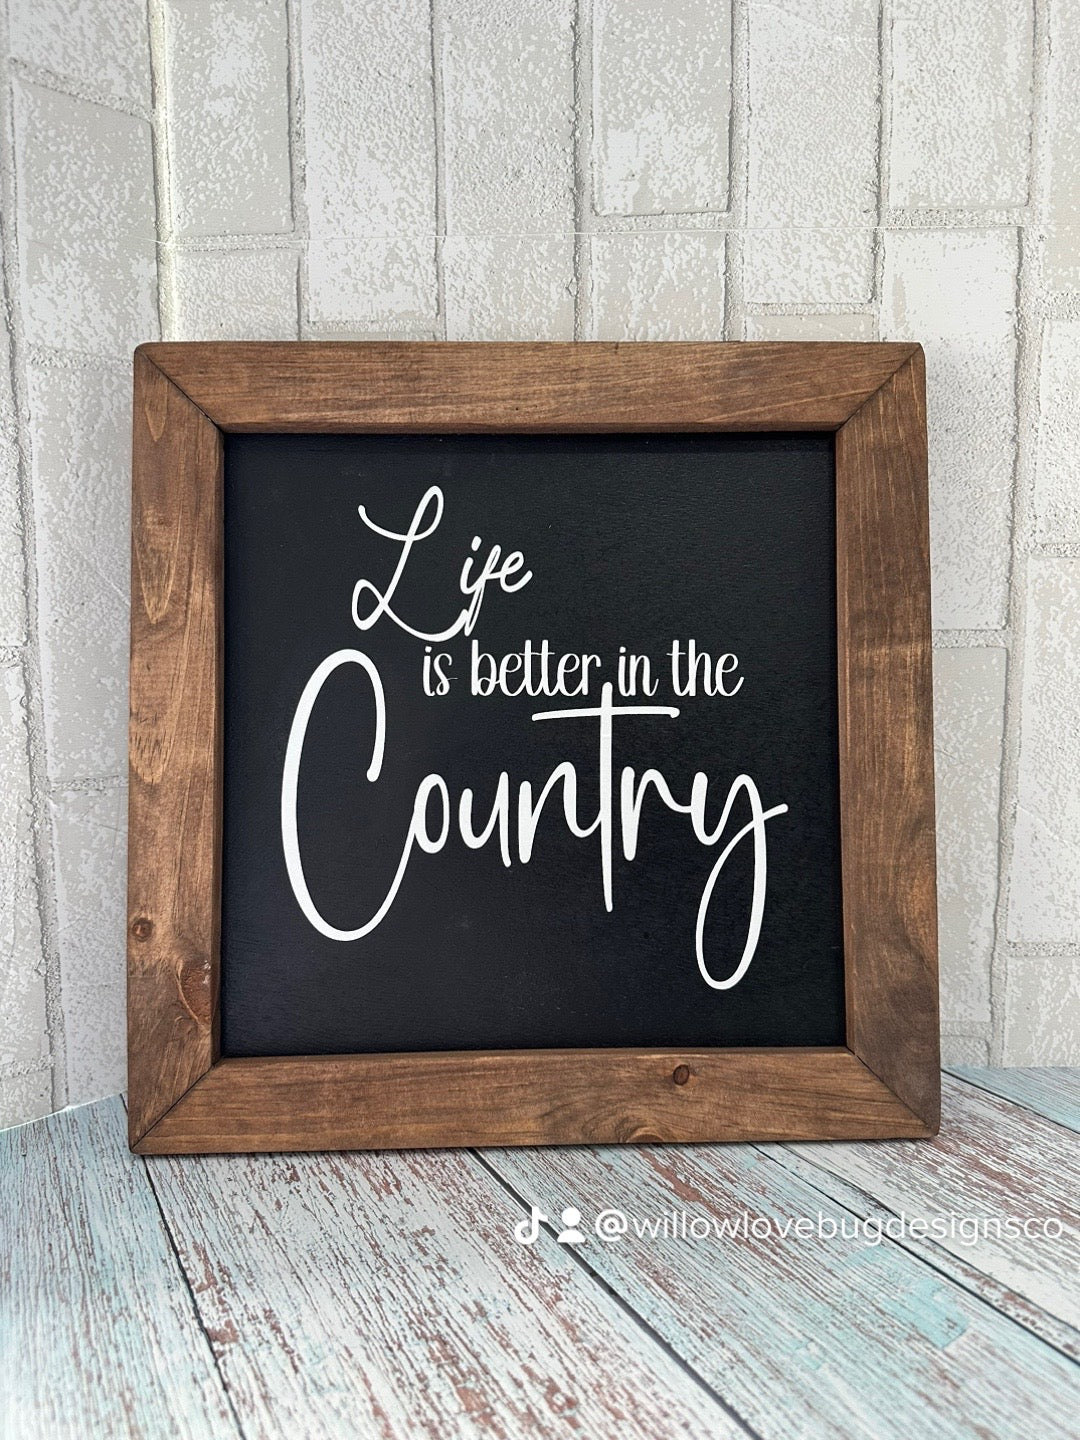 Wooden Sign, Life is better in the Country - Willow Love Bug Designs 